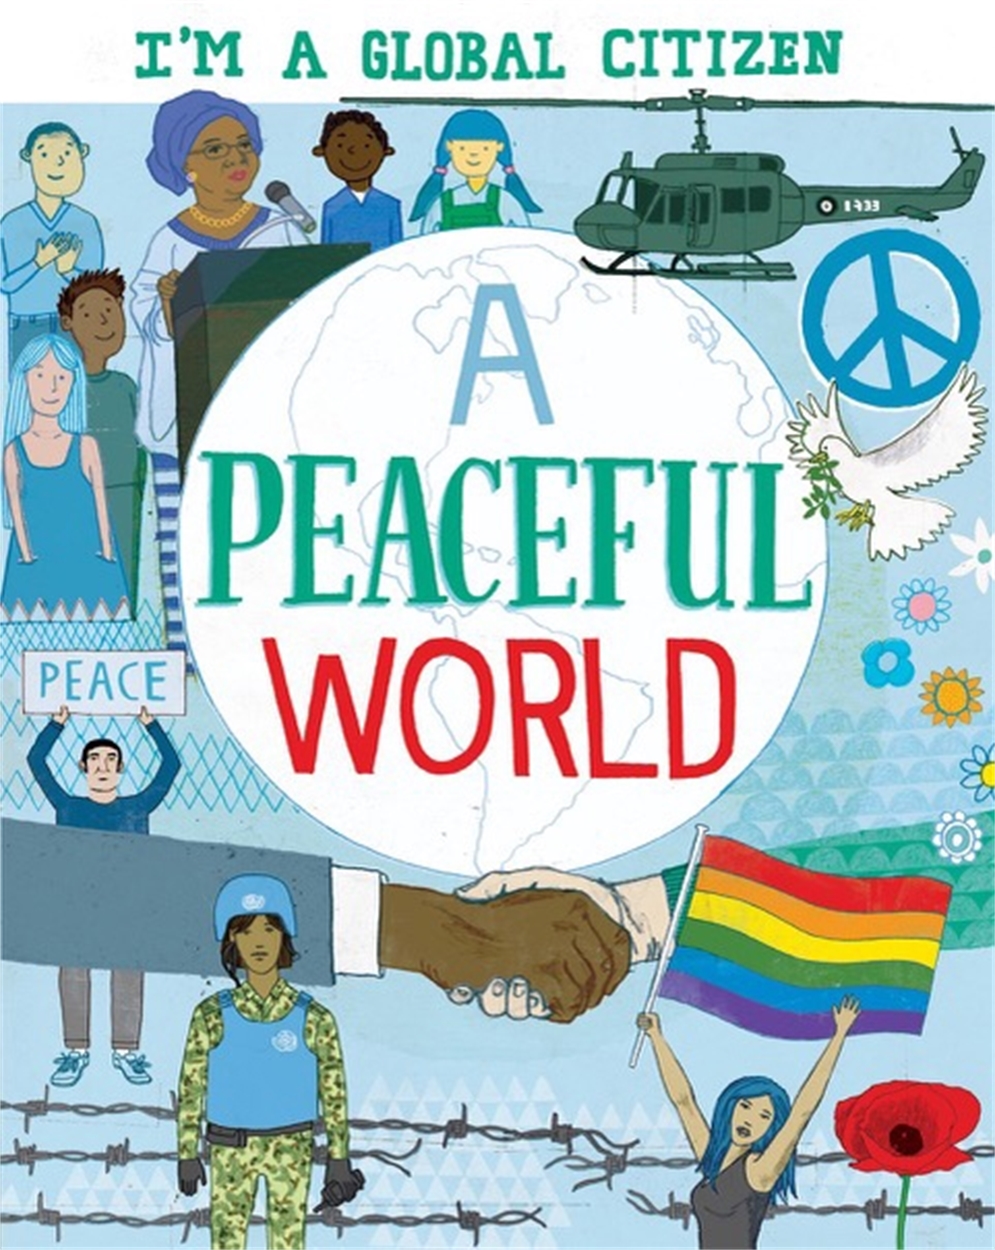 I'm a Global Citizen: A Peaceful World by Alice Harman | Hachette UK